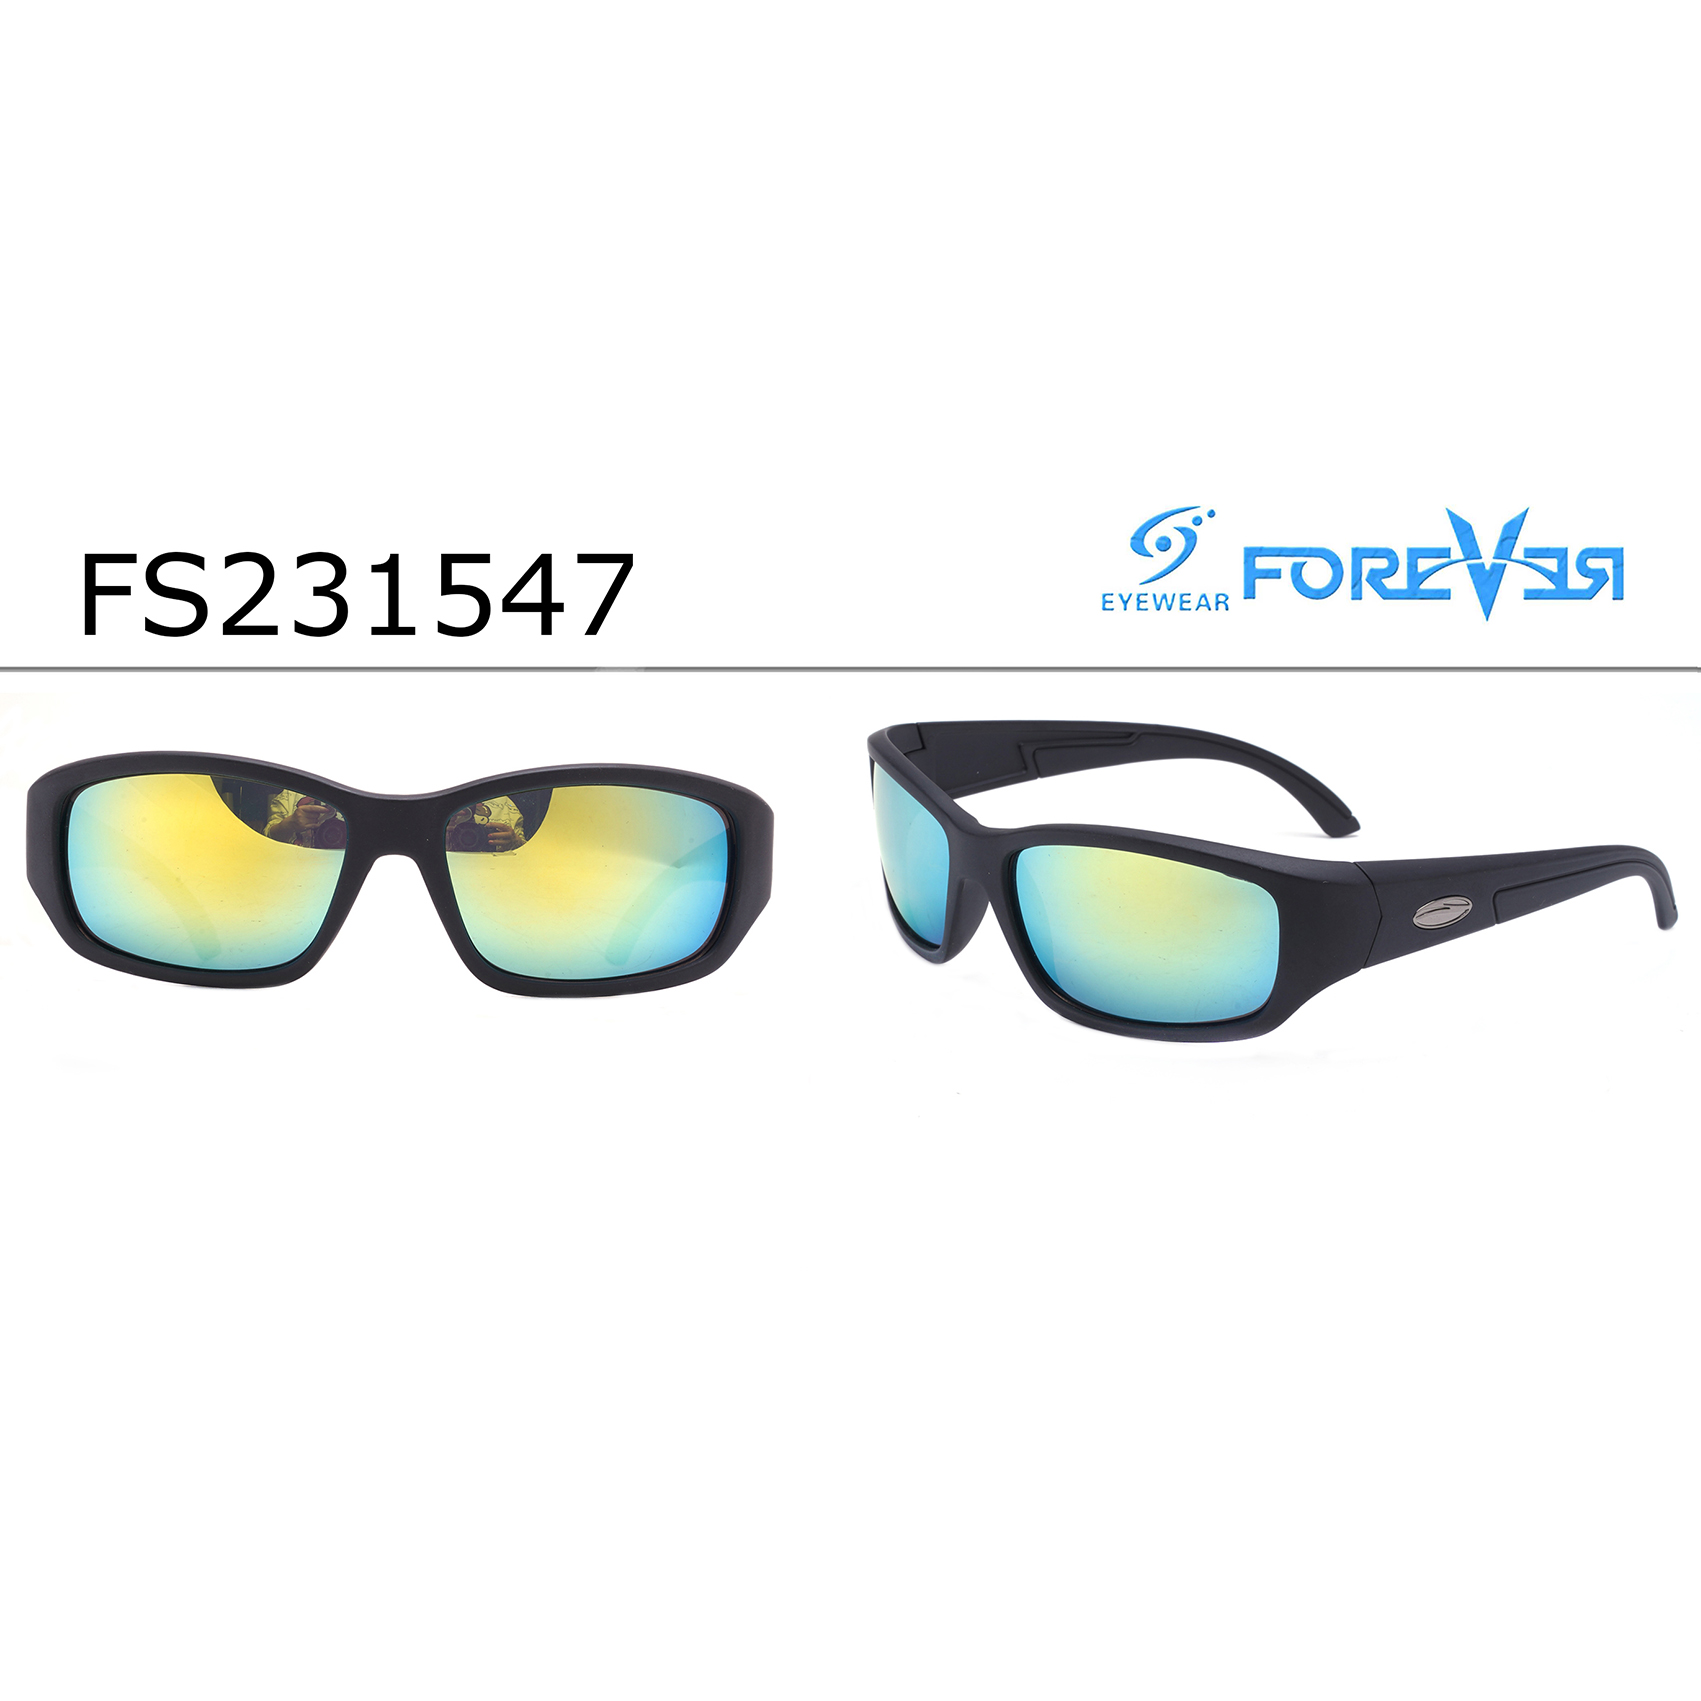 Black Sport Sunglasses with Yellow and Blue Polarizd Lenses Sports Sunglasses Manufacturers